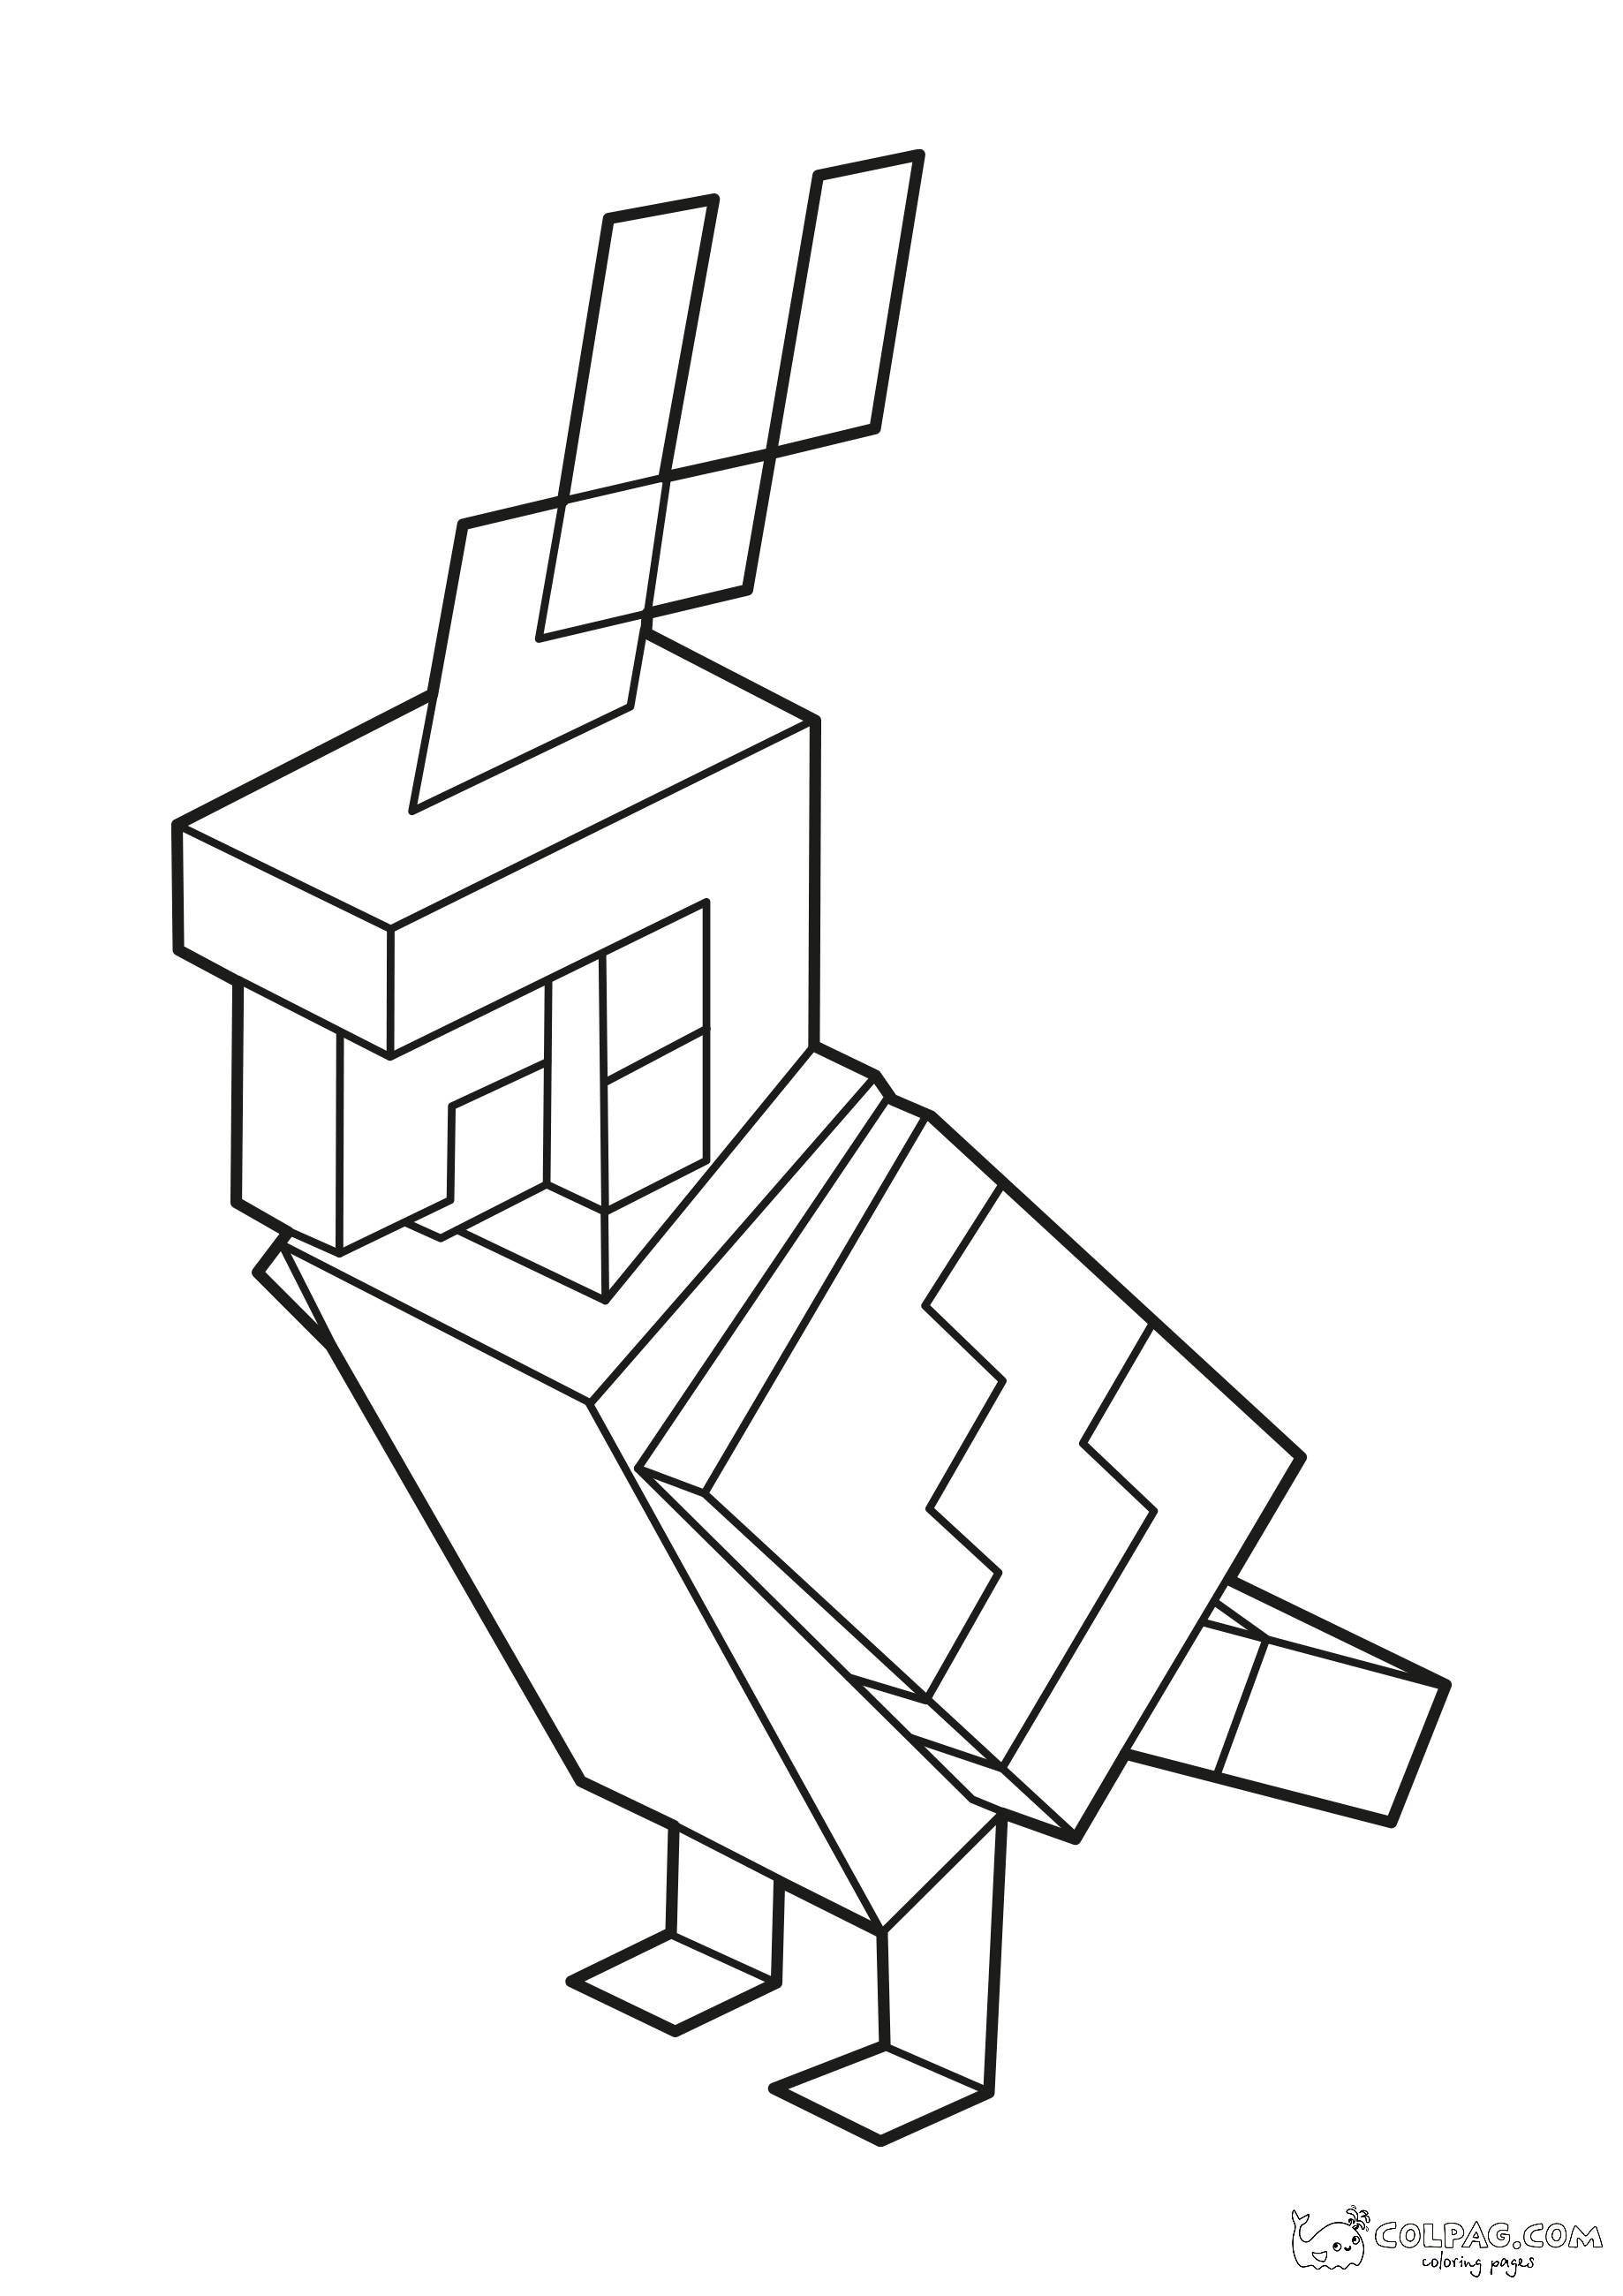 parrot-minecraft-coloring-page-colpag